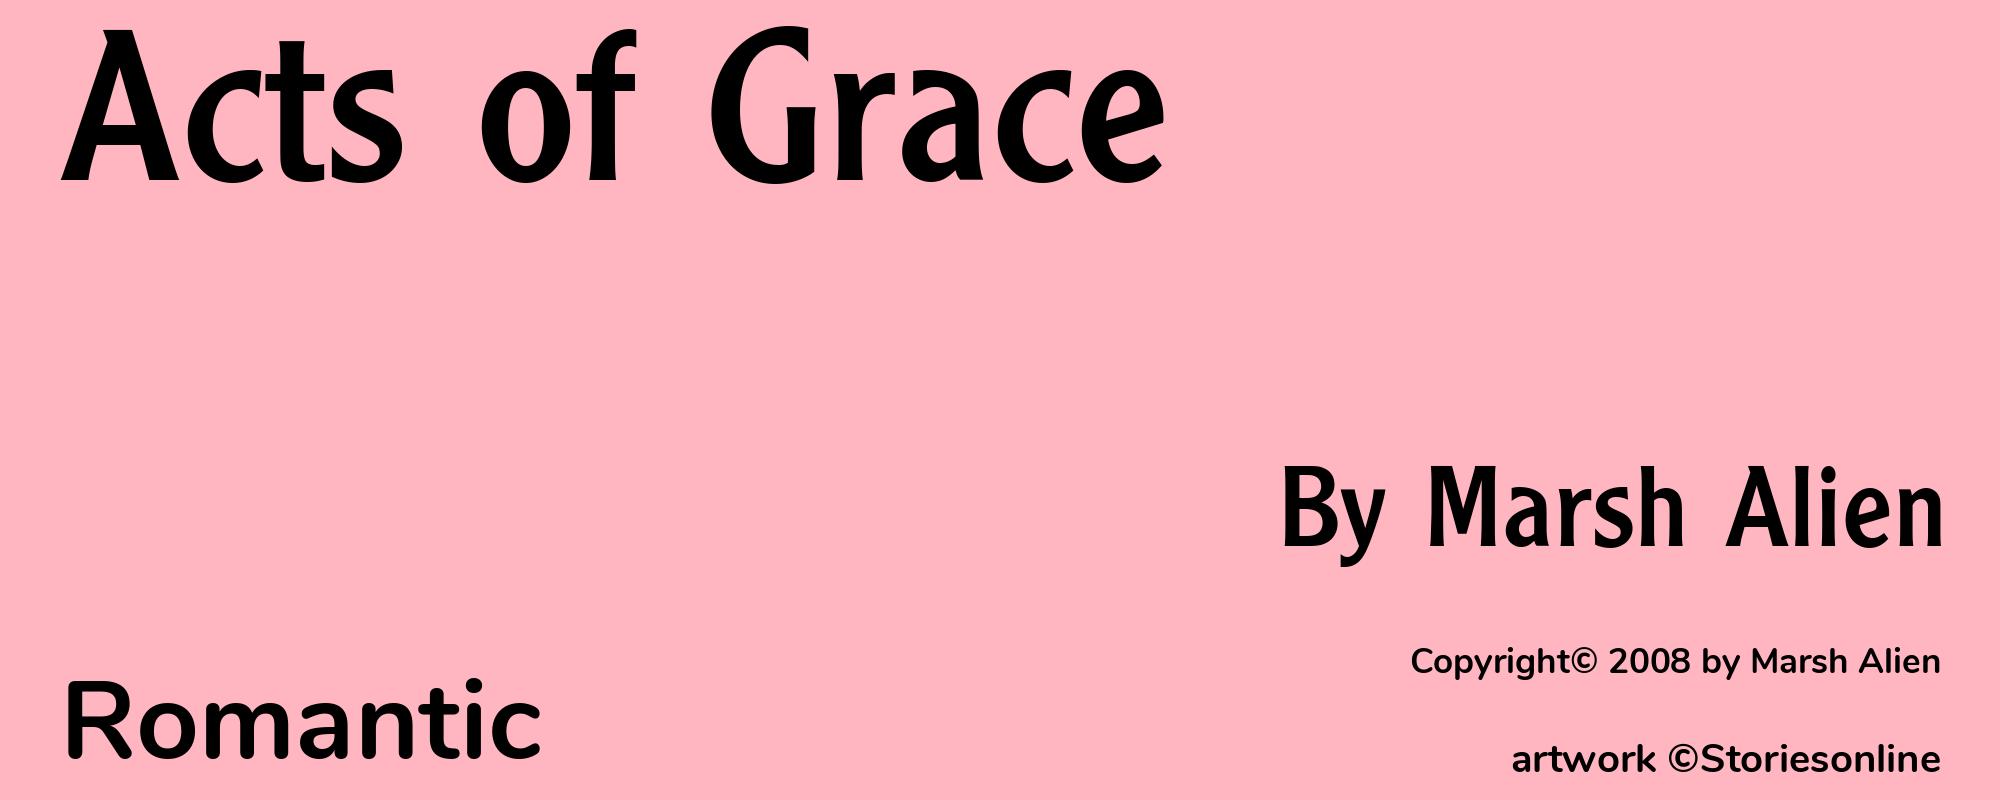 Acts of Grace - Cover